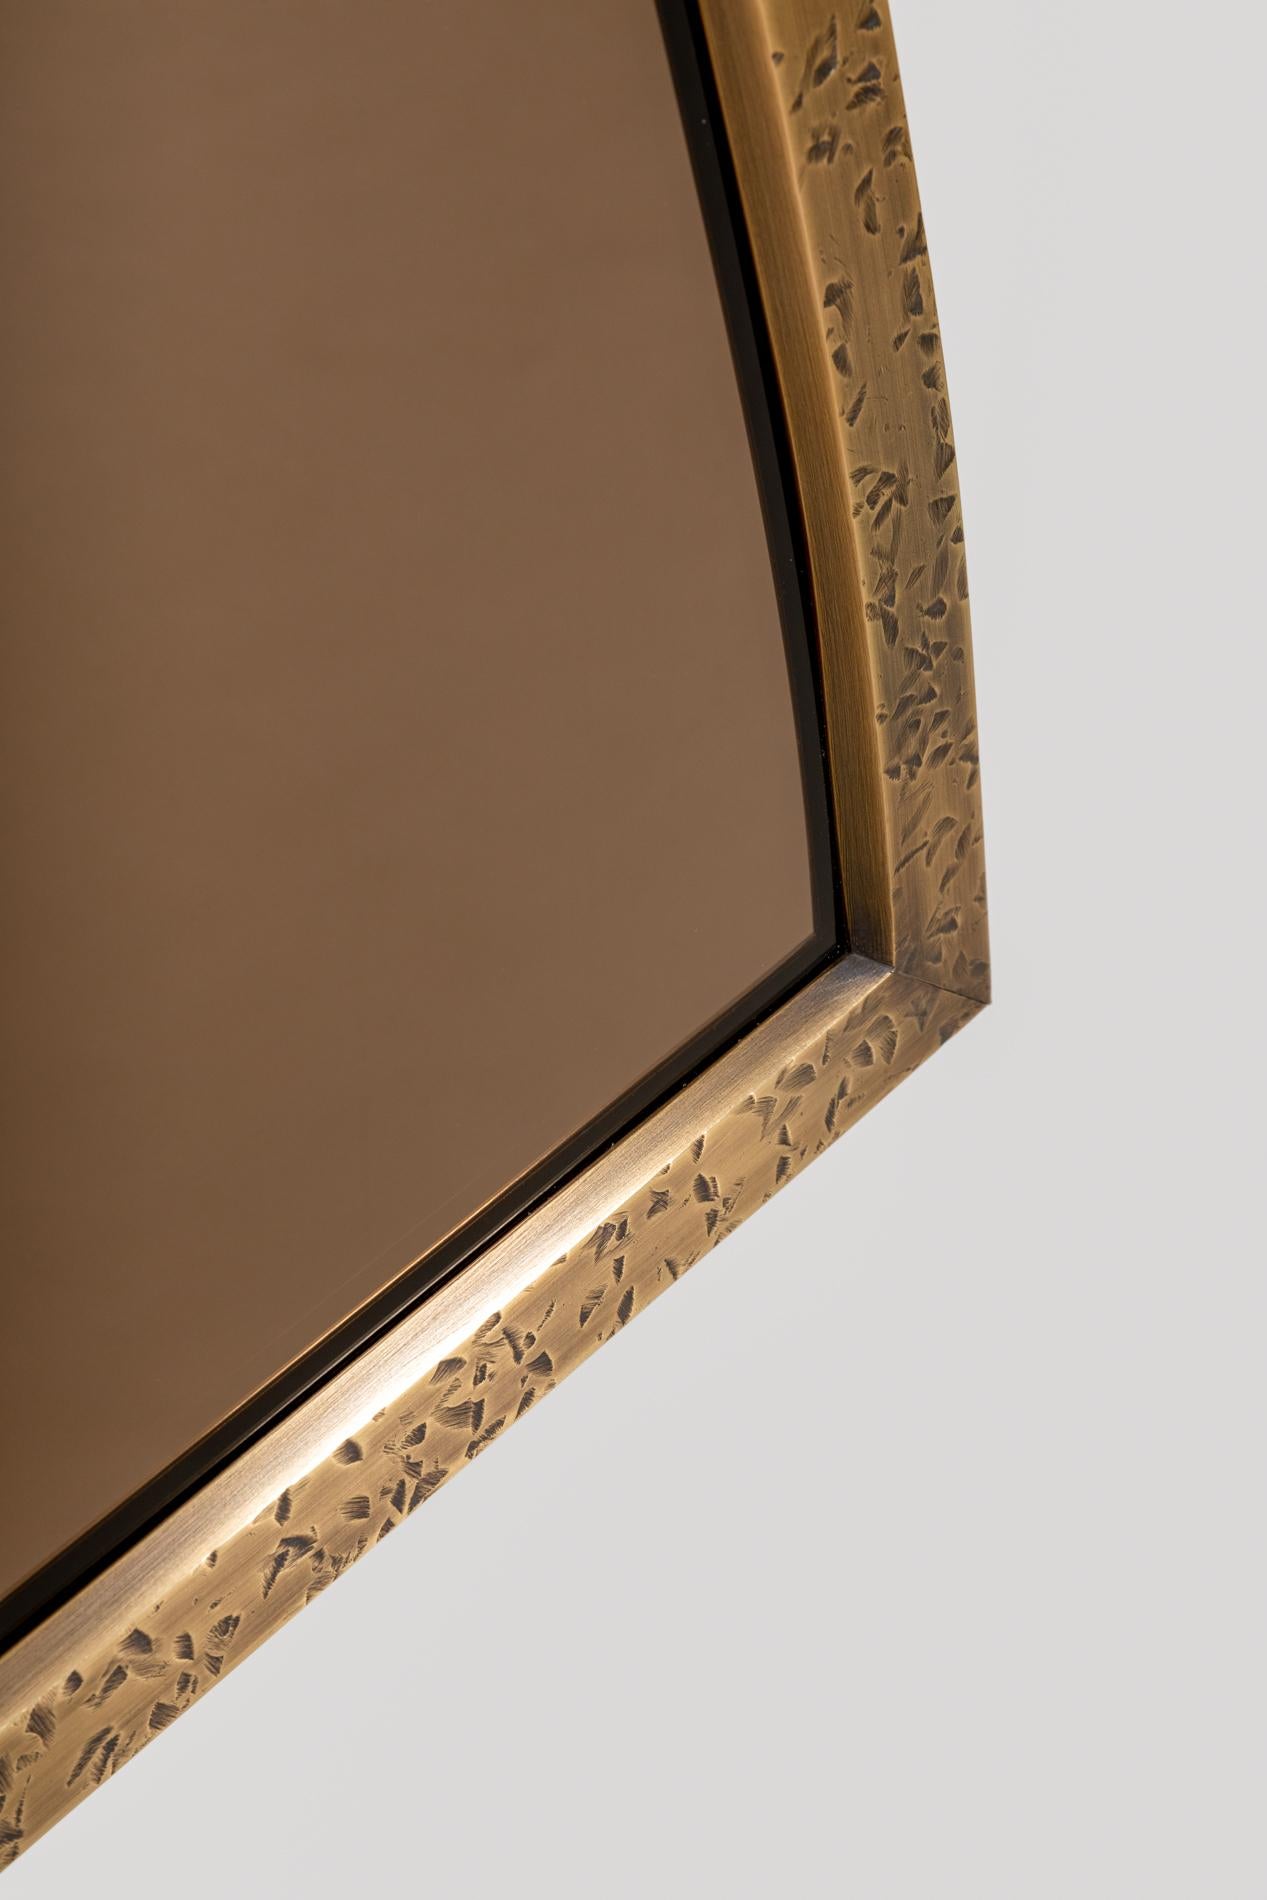 Mirooo Limited Edition Mirror by Moure Studio For Sale 4